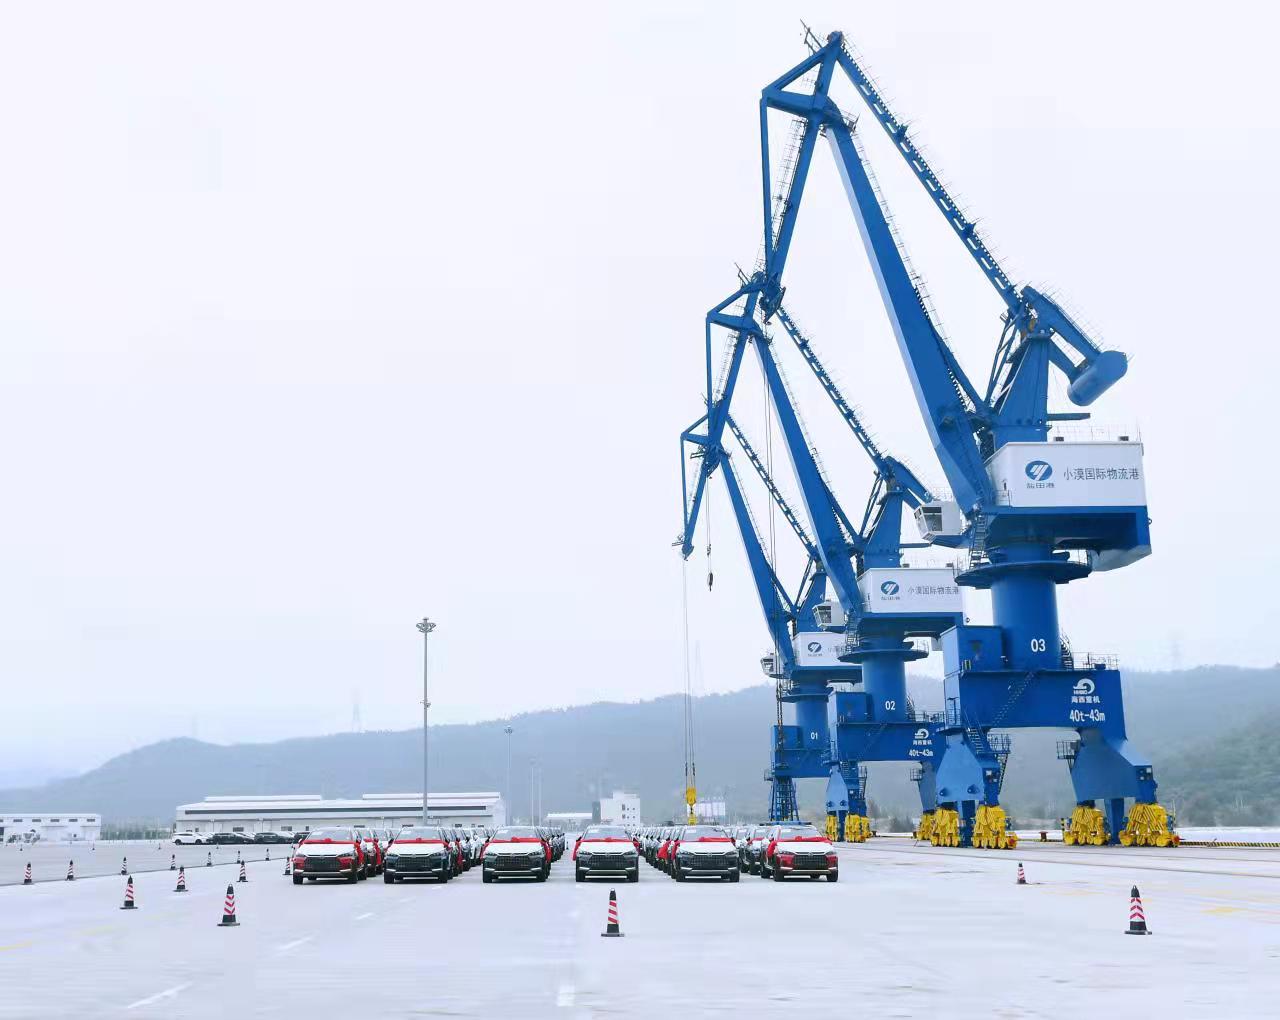  Shenzhen Shantou Xiaomo International Logistics Port made the first voyage of car ro ro ships, 336 BYD cars went to sea by boat